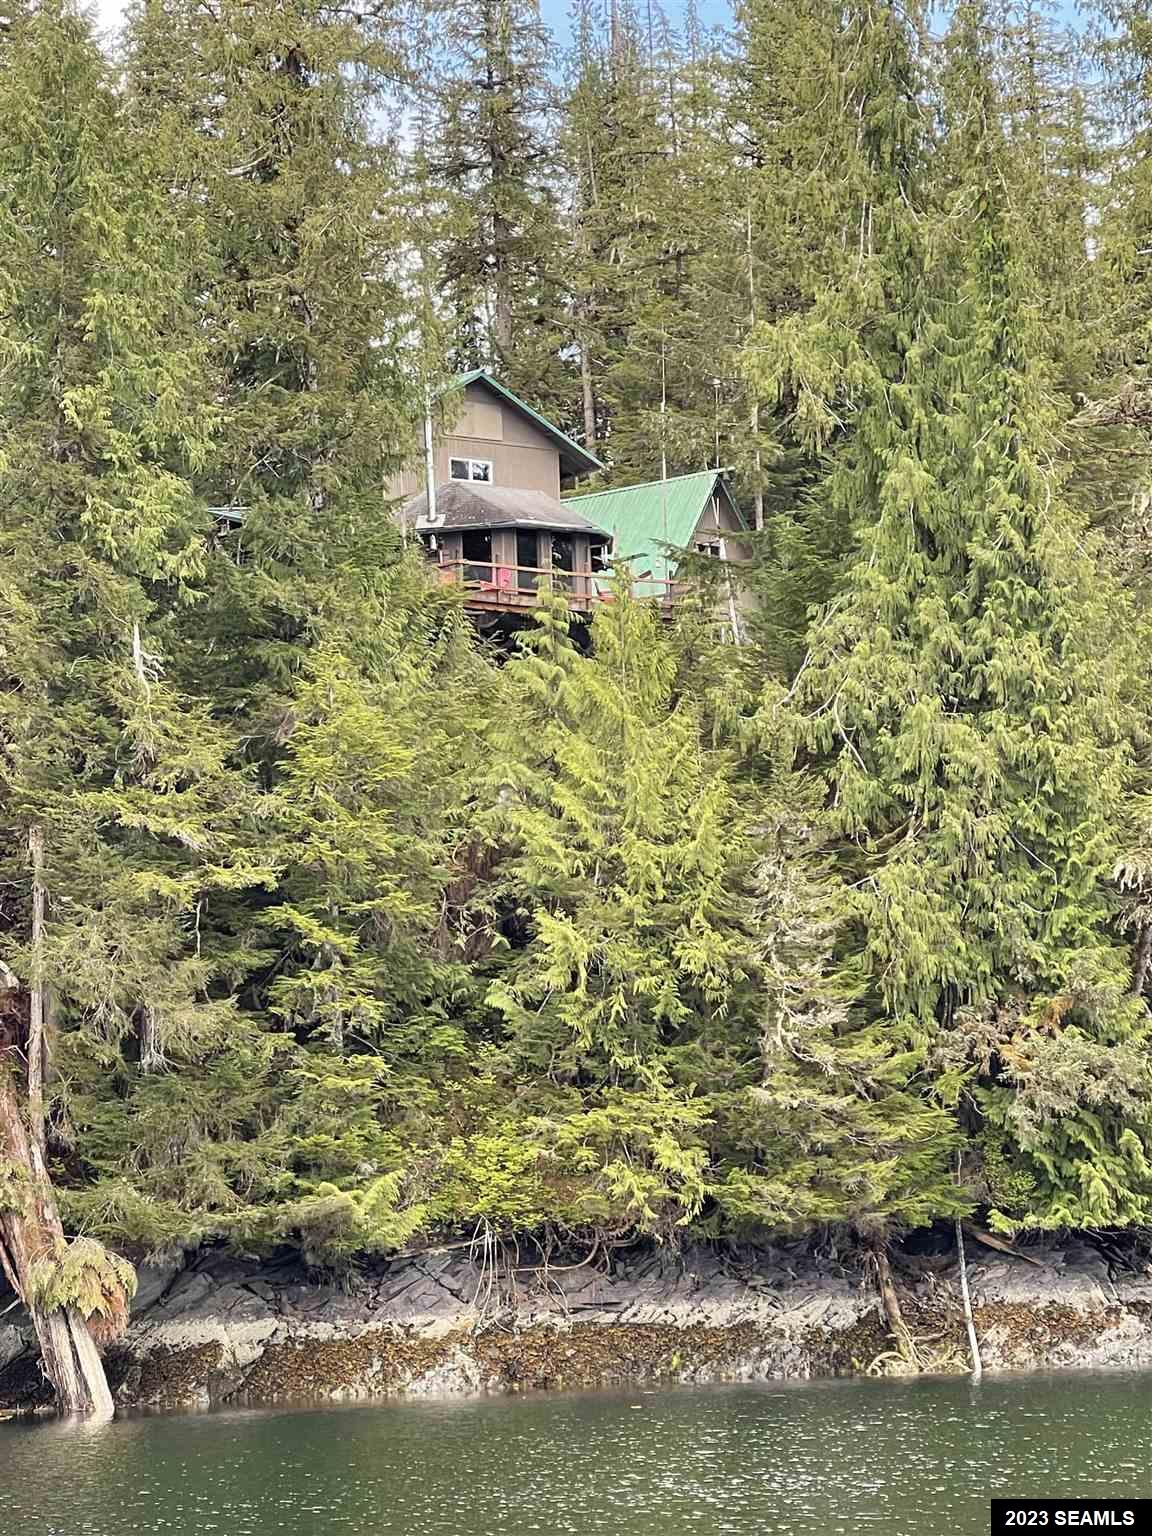 Legal Address Only, Ketchikan, AK 99901, 3 Bedrooms Bedrooms, ,2 BathroomsBathrooms,Residential,For Sale,Legal Address Only,23338